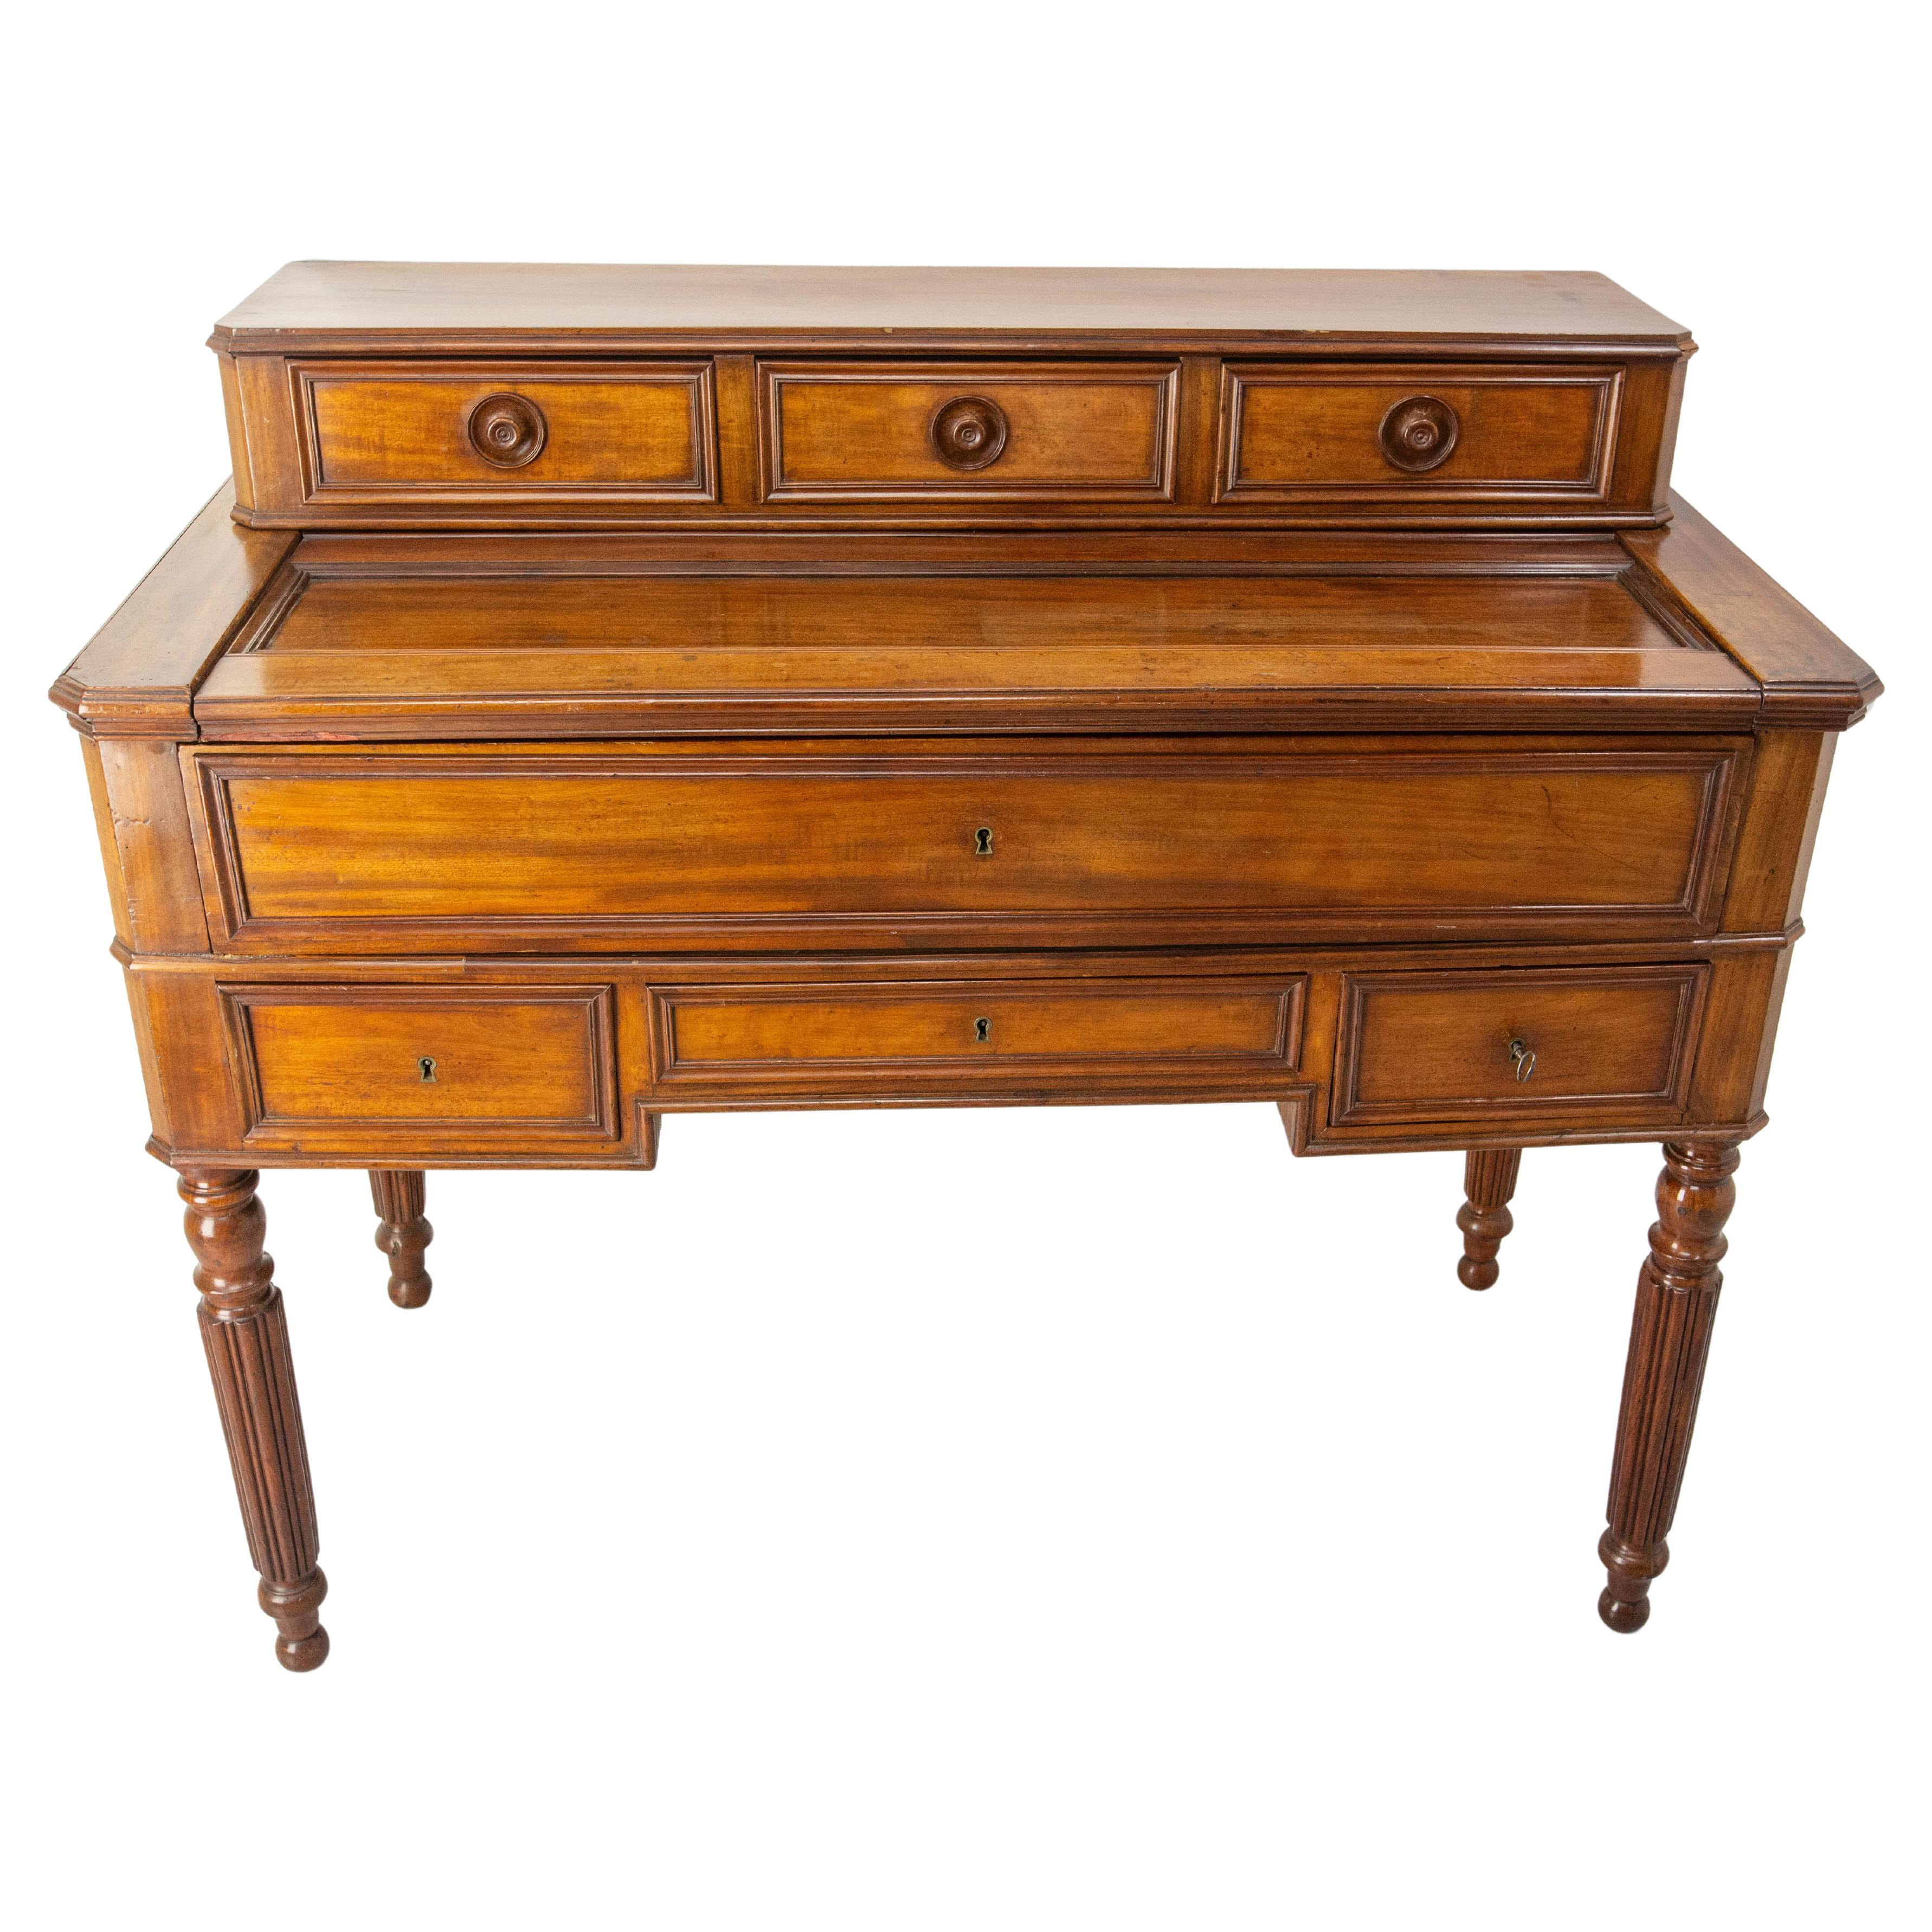 French  Louis Philippe Desk Writing Table Secret Drawers, 19th Century